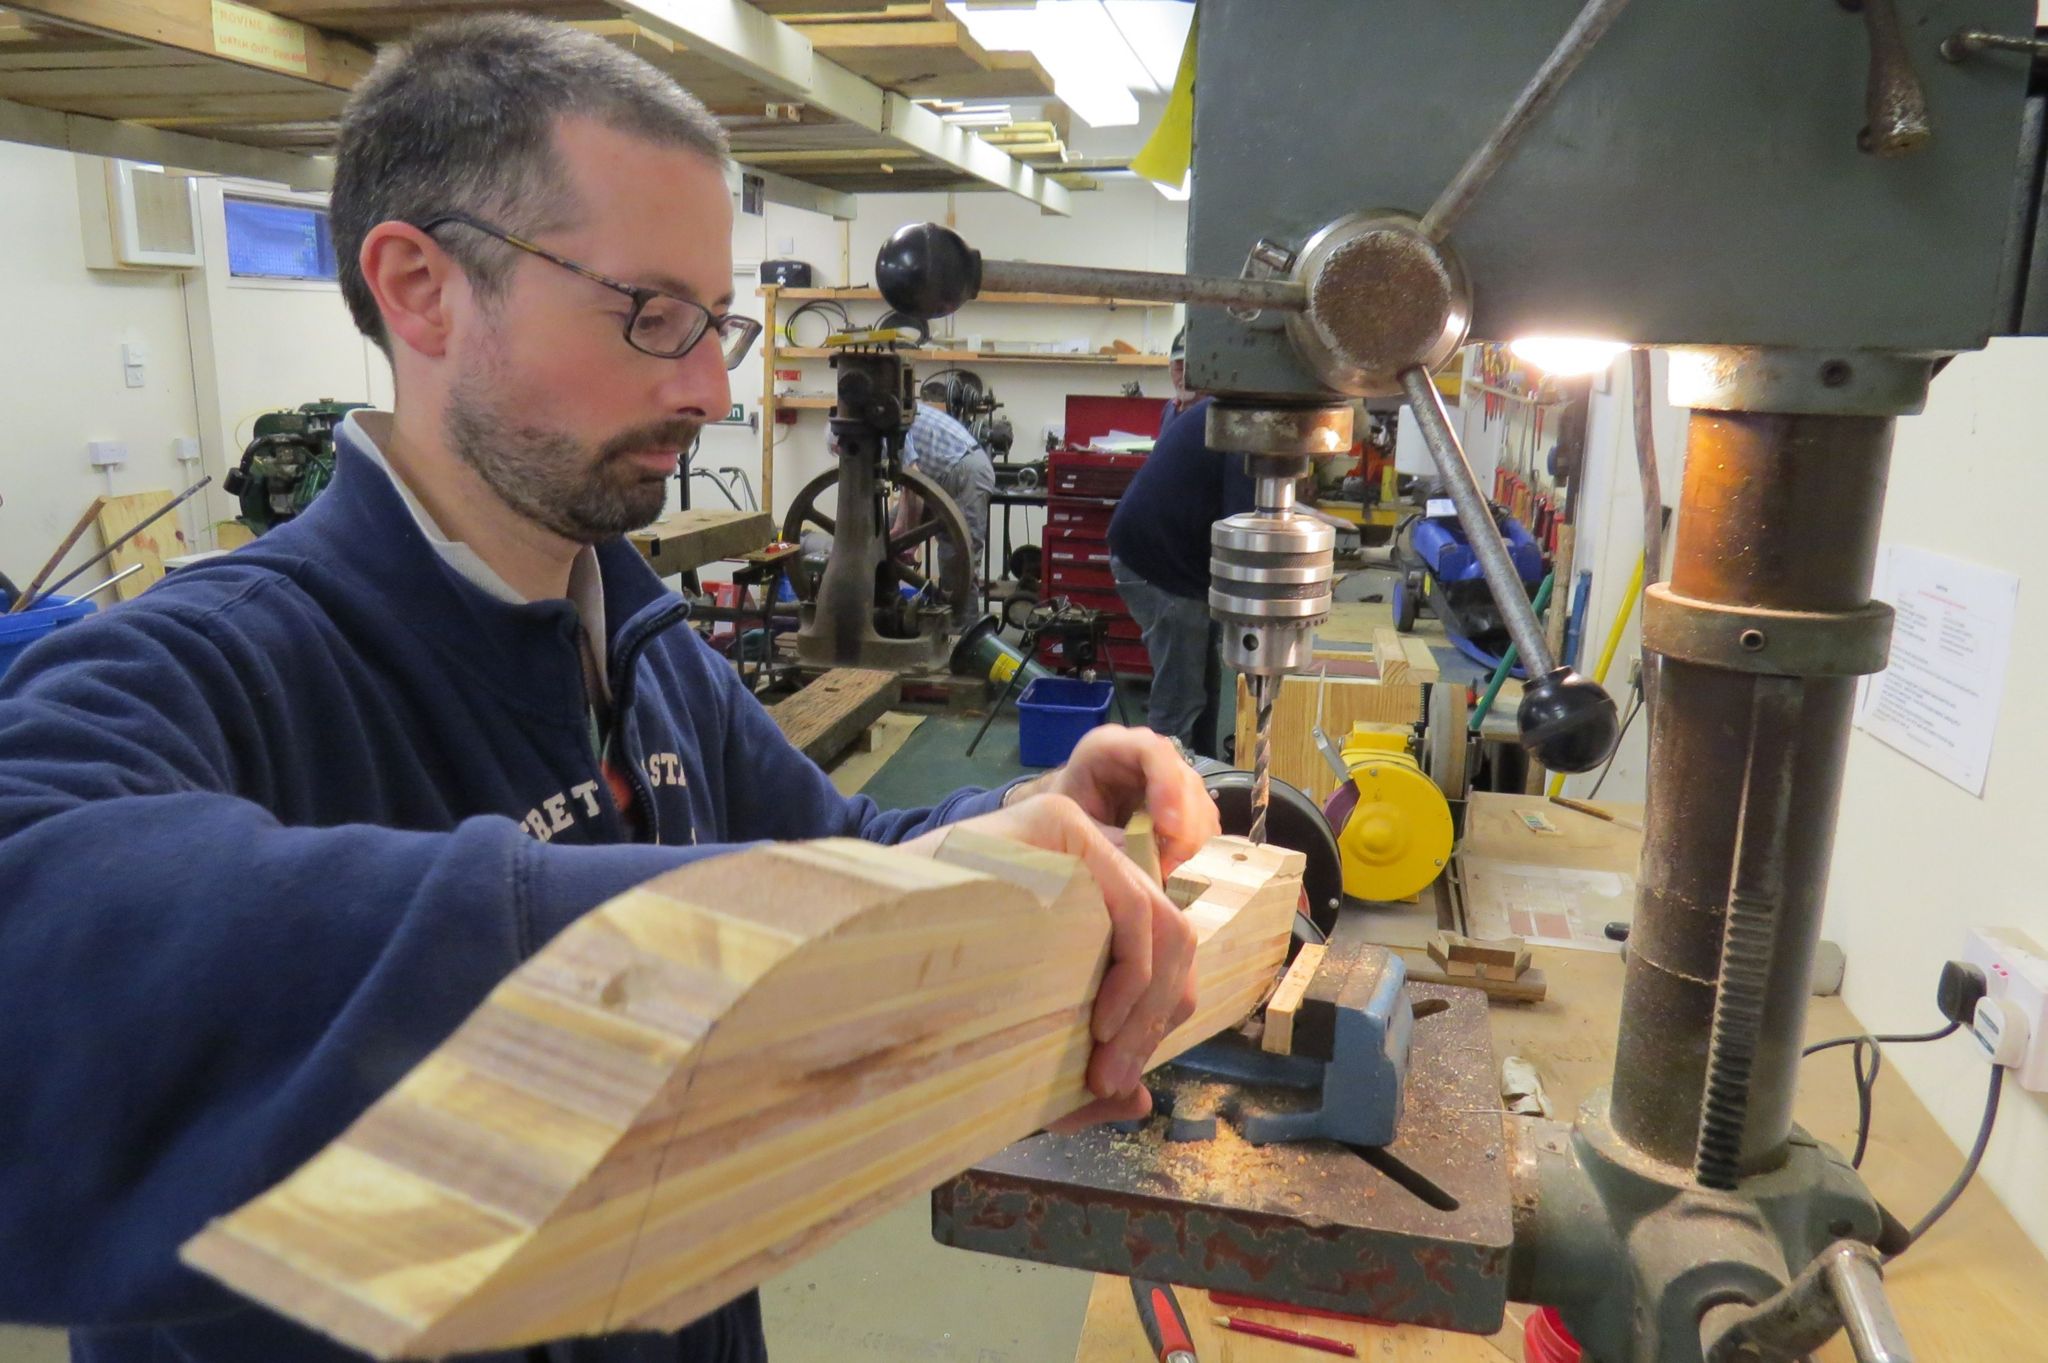 Man using a woodworking tool at a Men's Shed